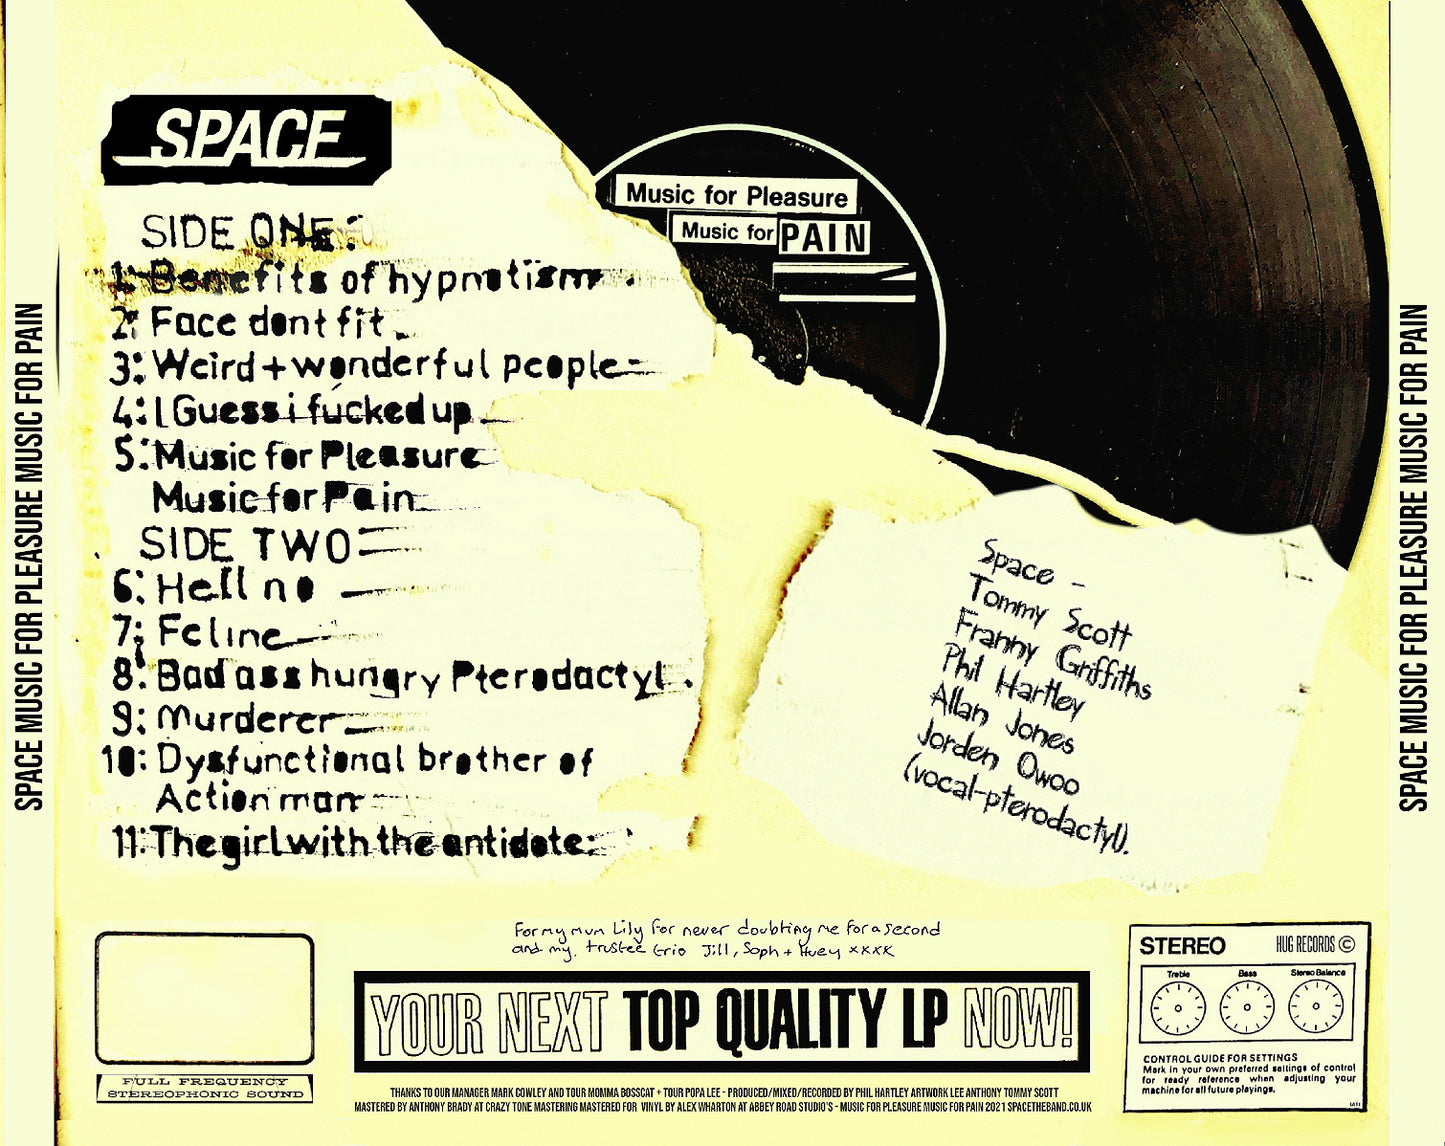 Space - Music For Pleasure Music For Pain CD